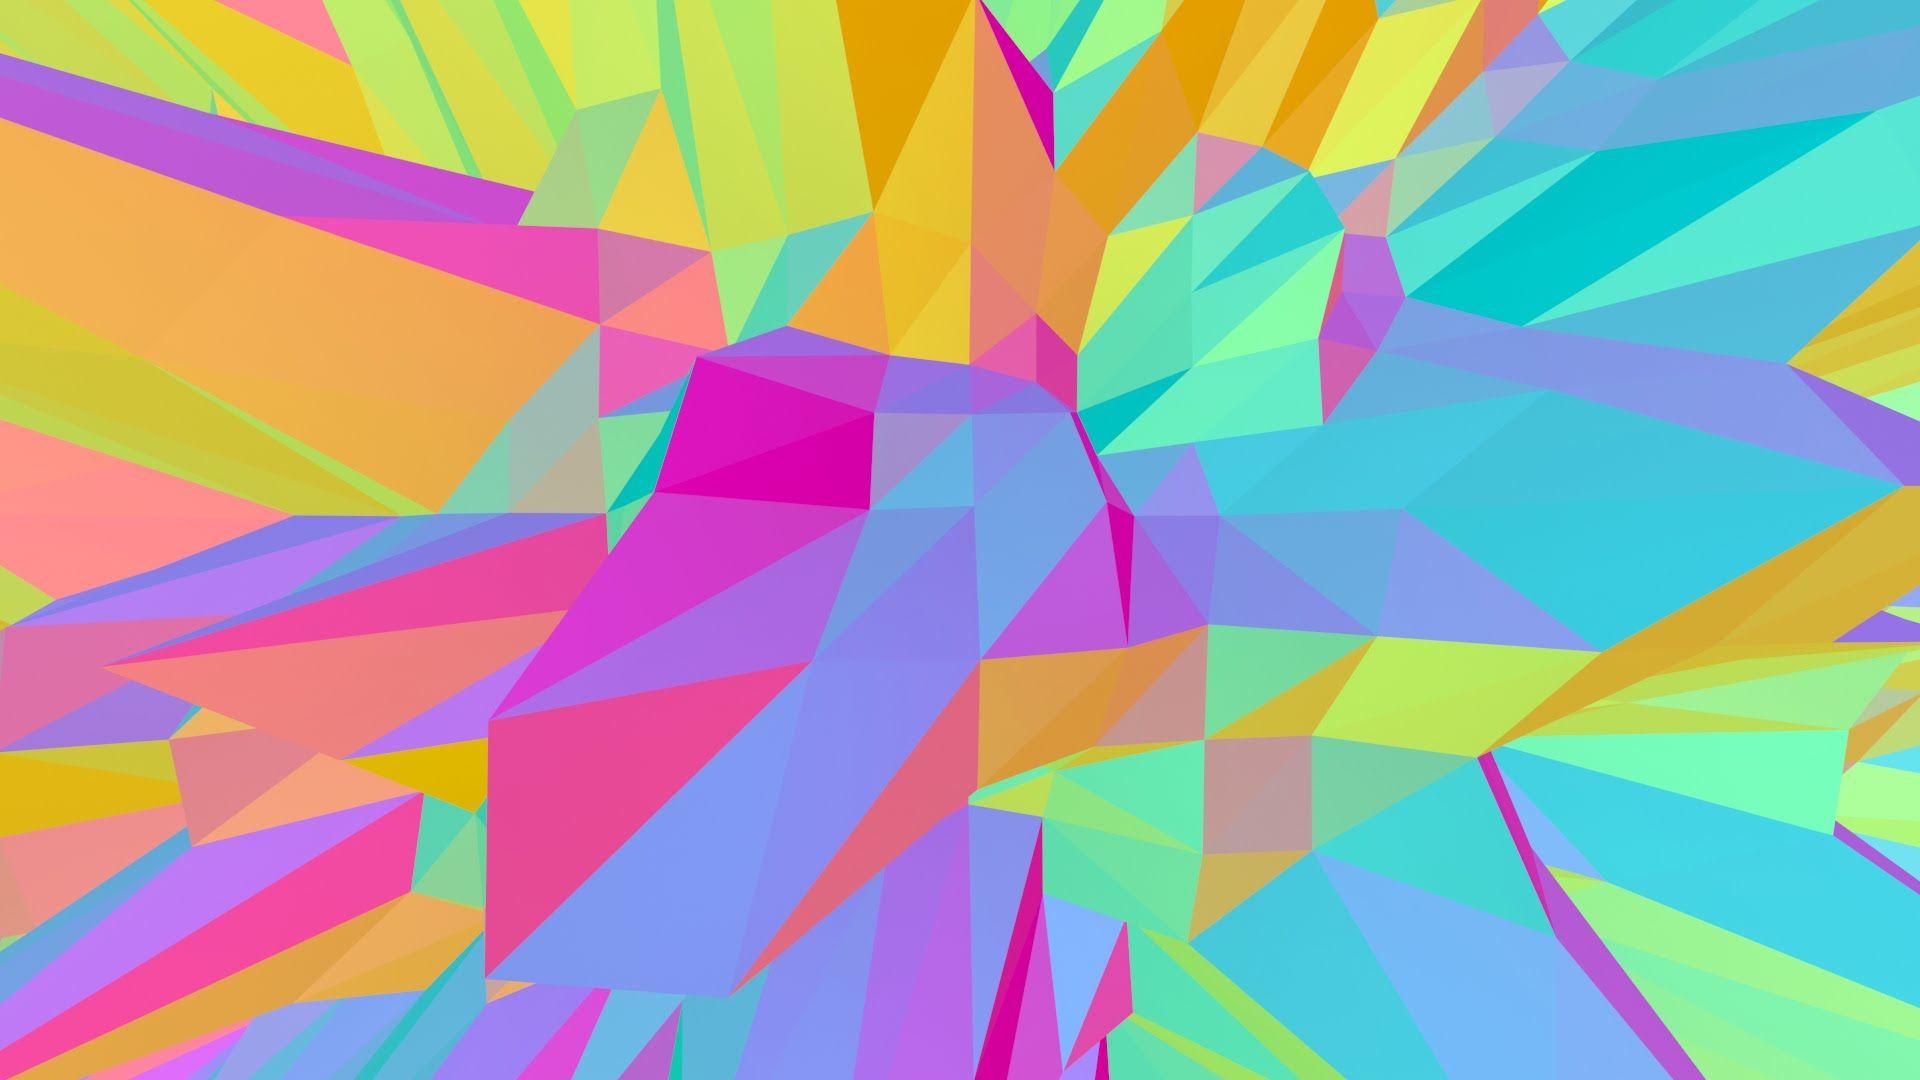 Dancing moving rainbow triangles animated background